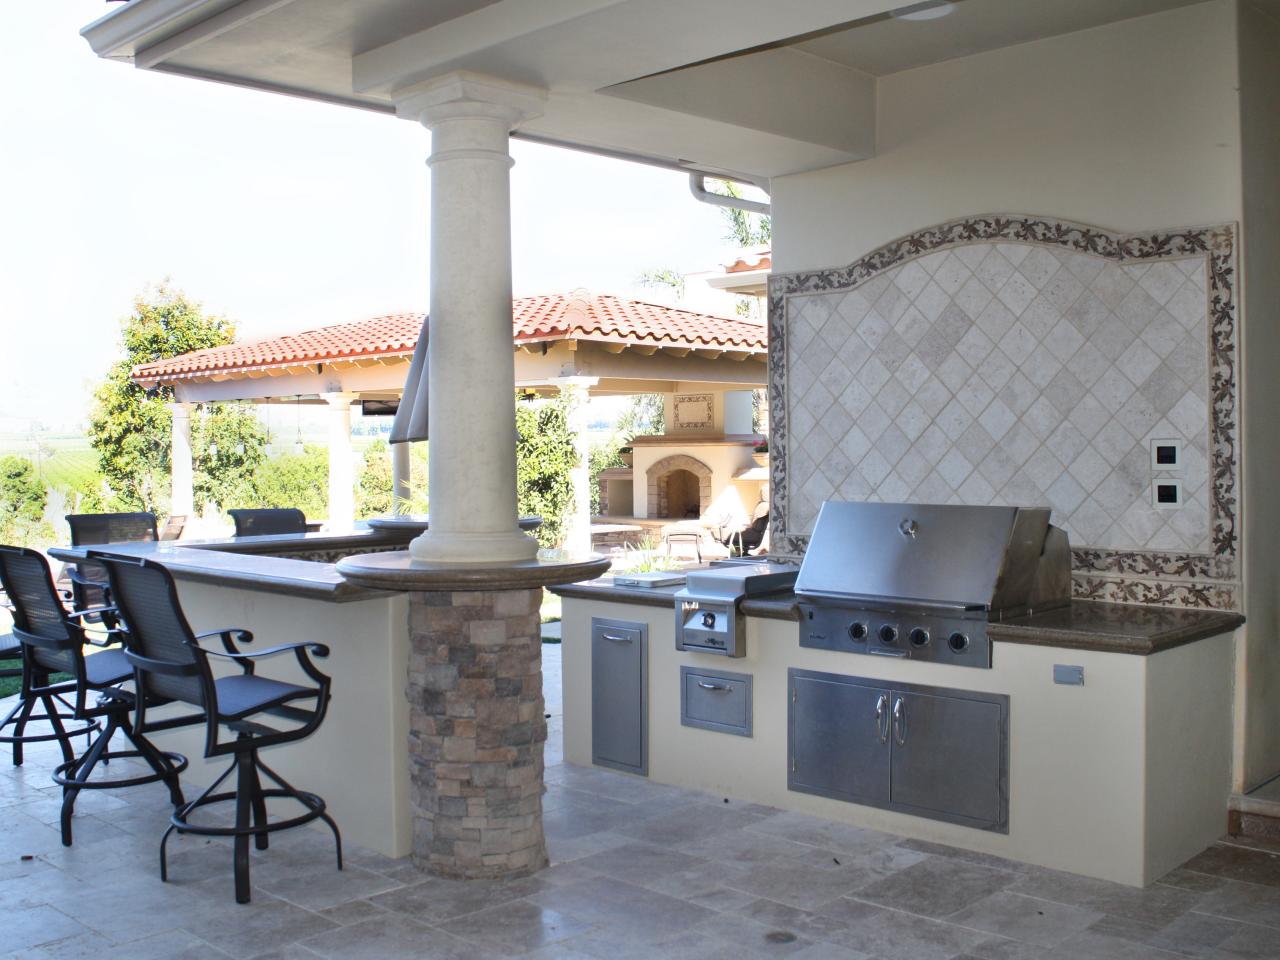 Outdoor Kitchen Cabinet Ideas: Pictures, Tips & Expert ...